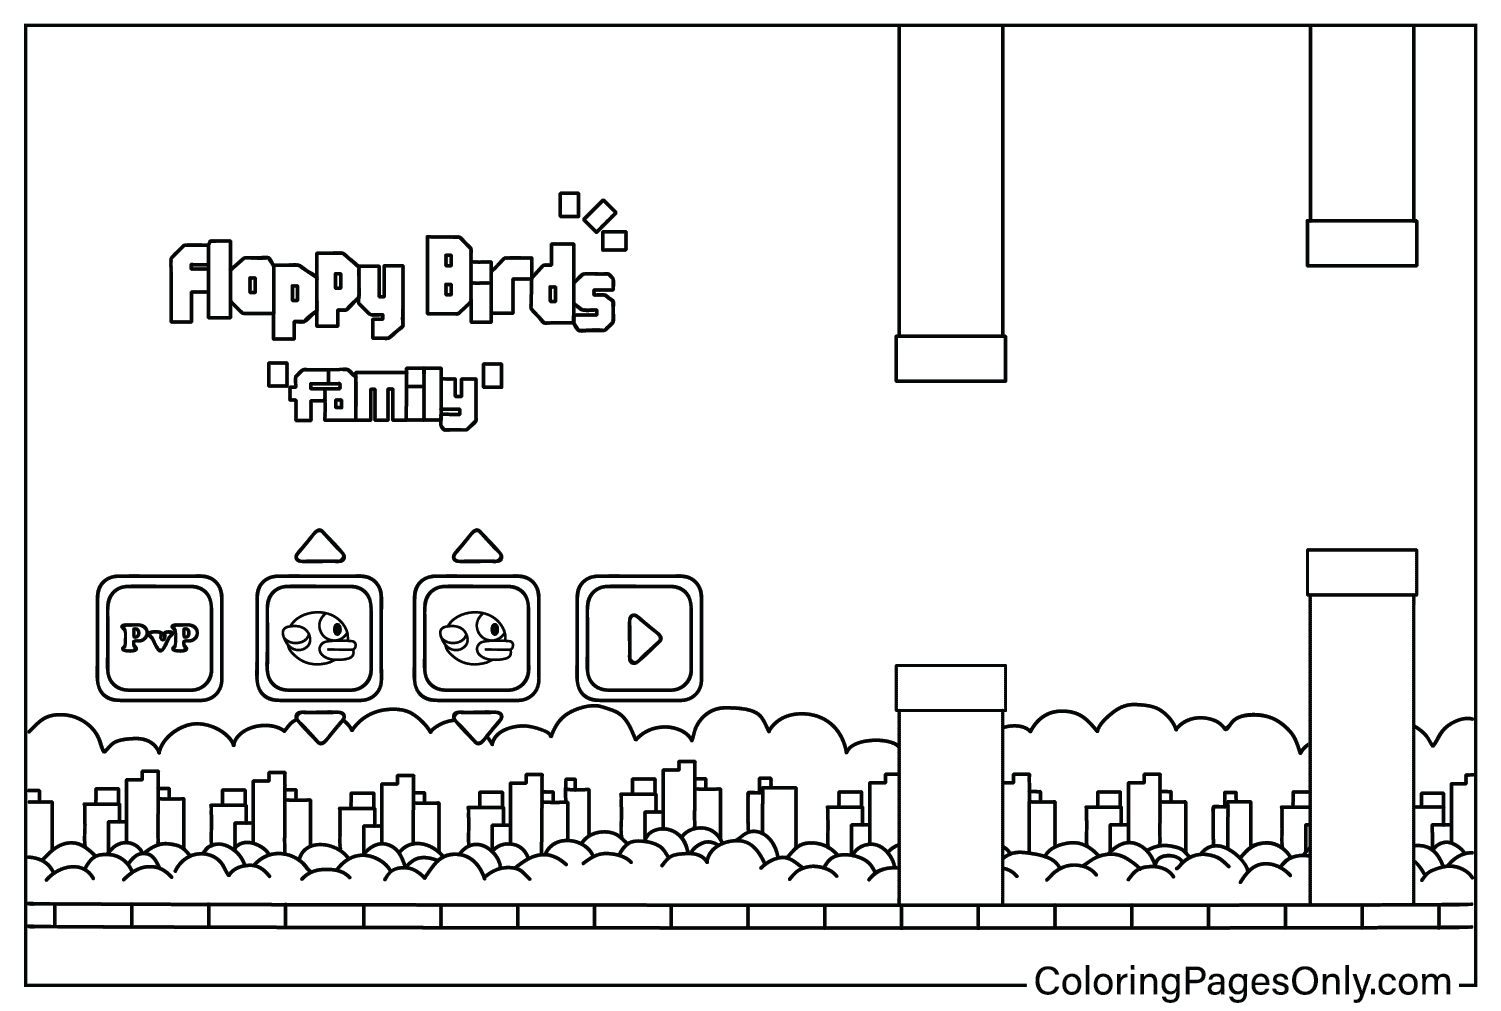 Flappy Bird Coloring Page Free from Flappy Bird